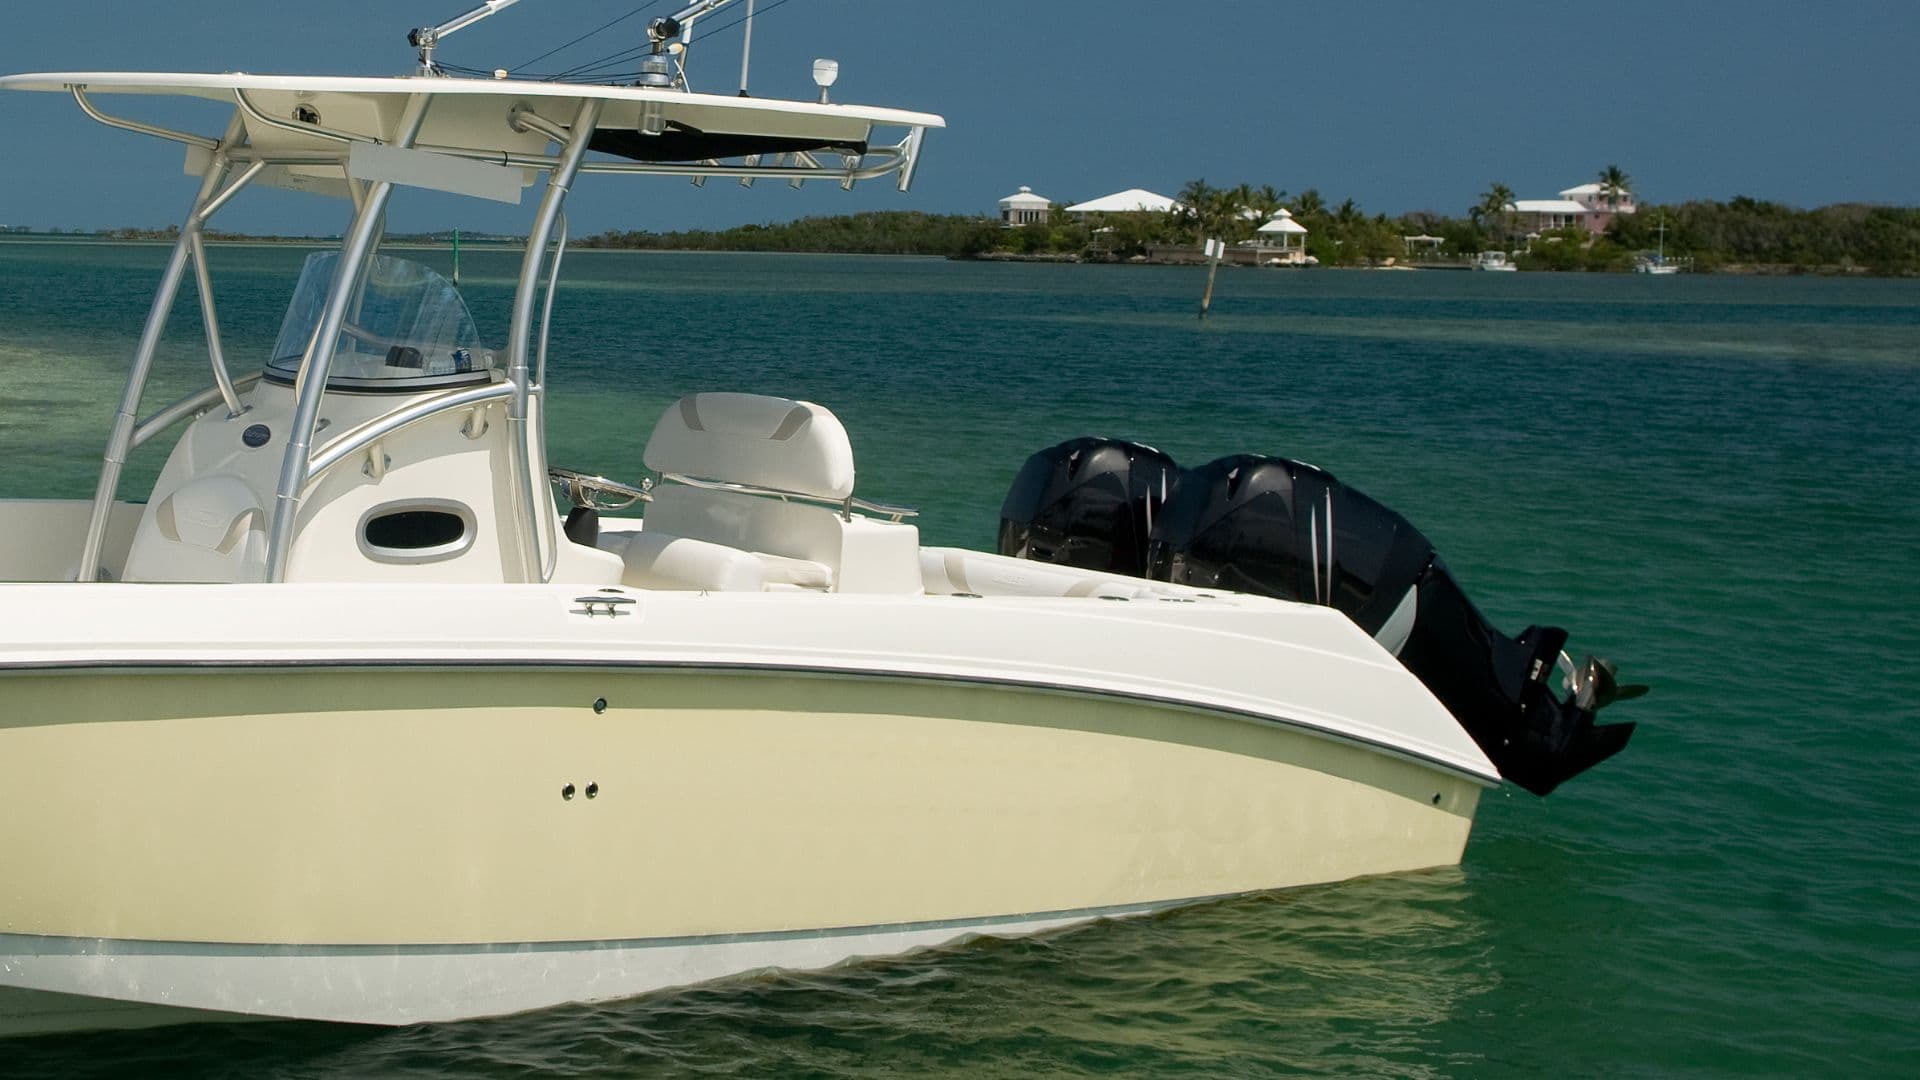 An image of a ccenter console boat with outboard engines on it. 